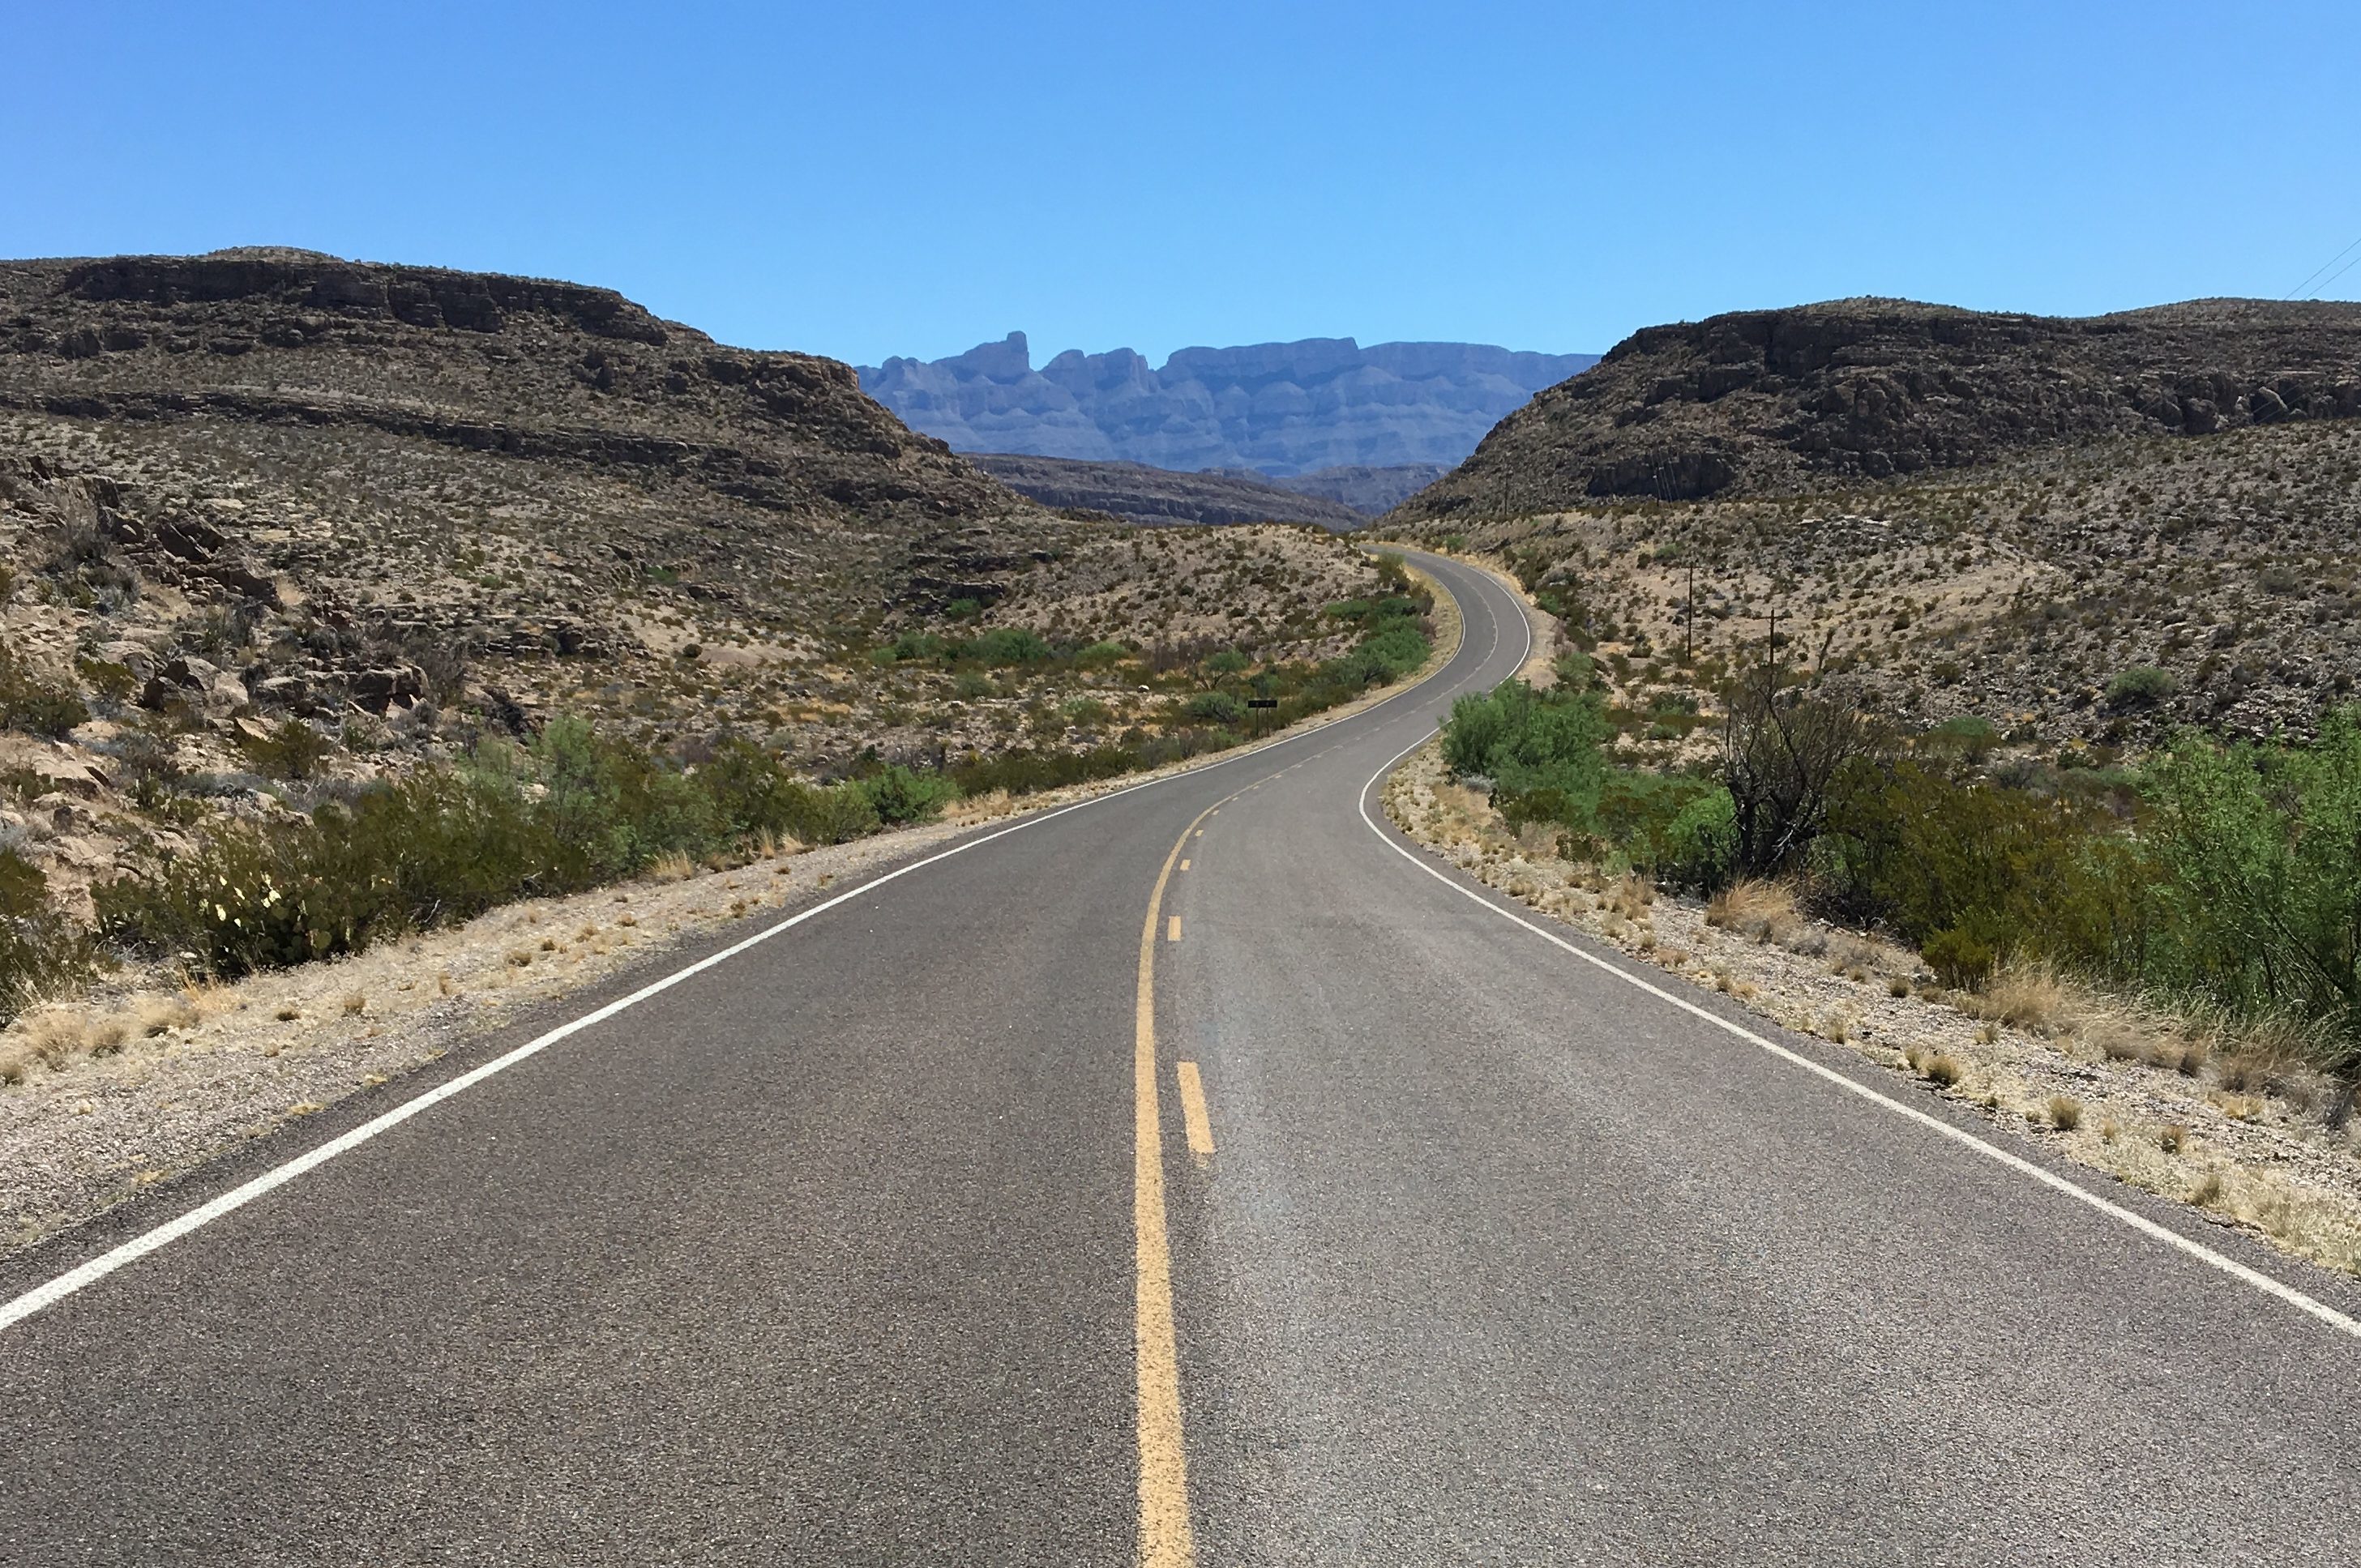 The road heading south through the Big Bend National Park in Texas, heading towards the Mexican border